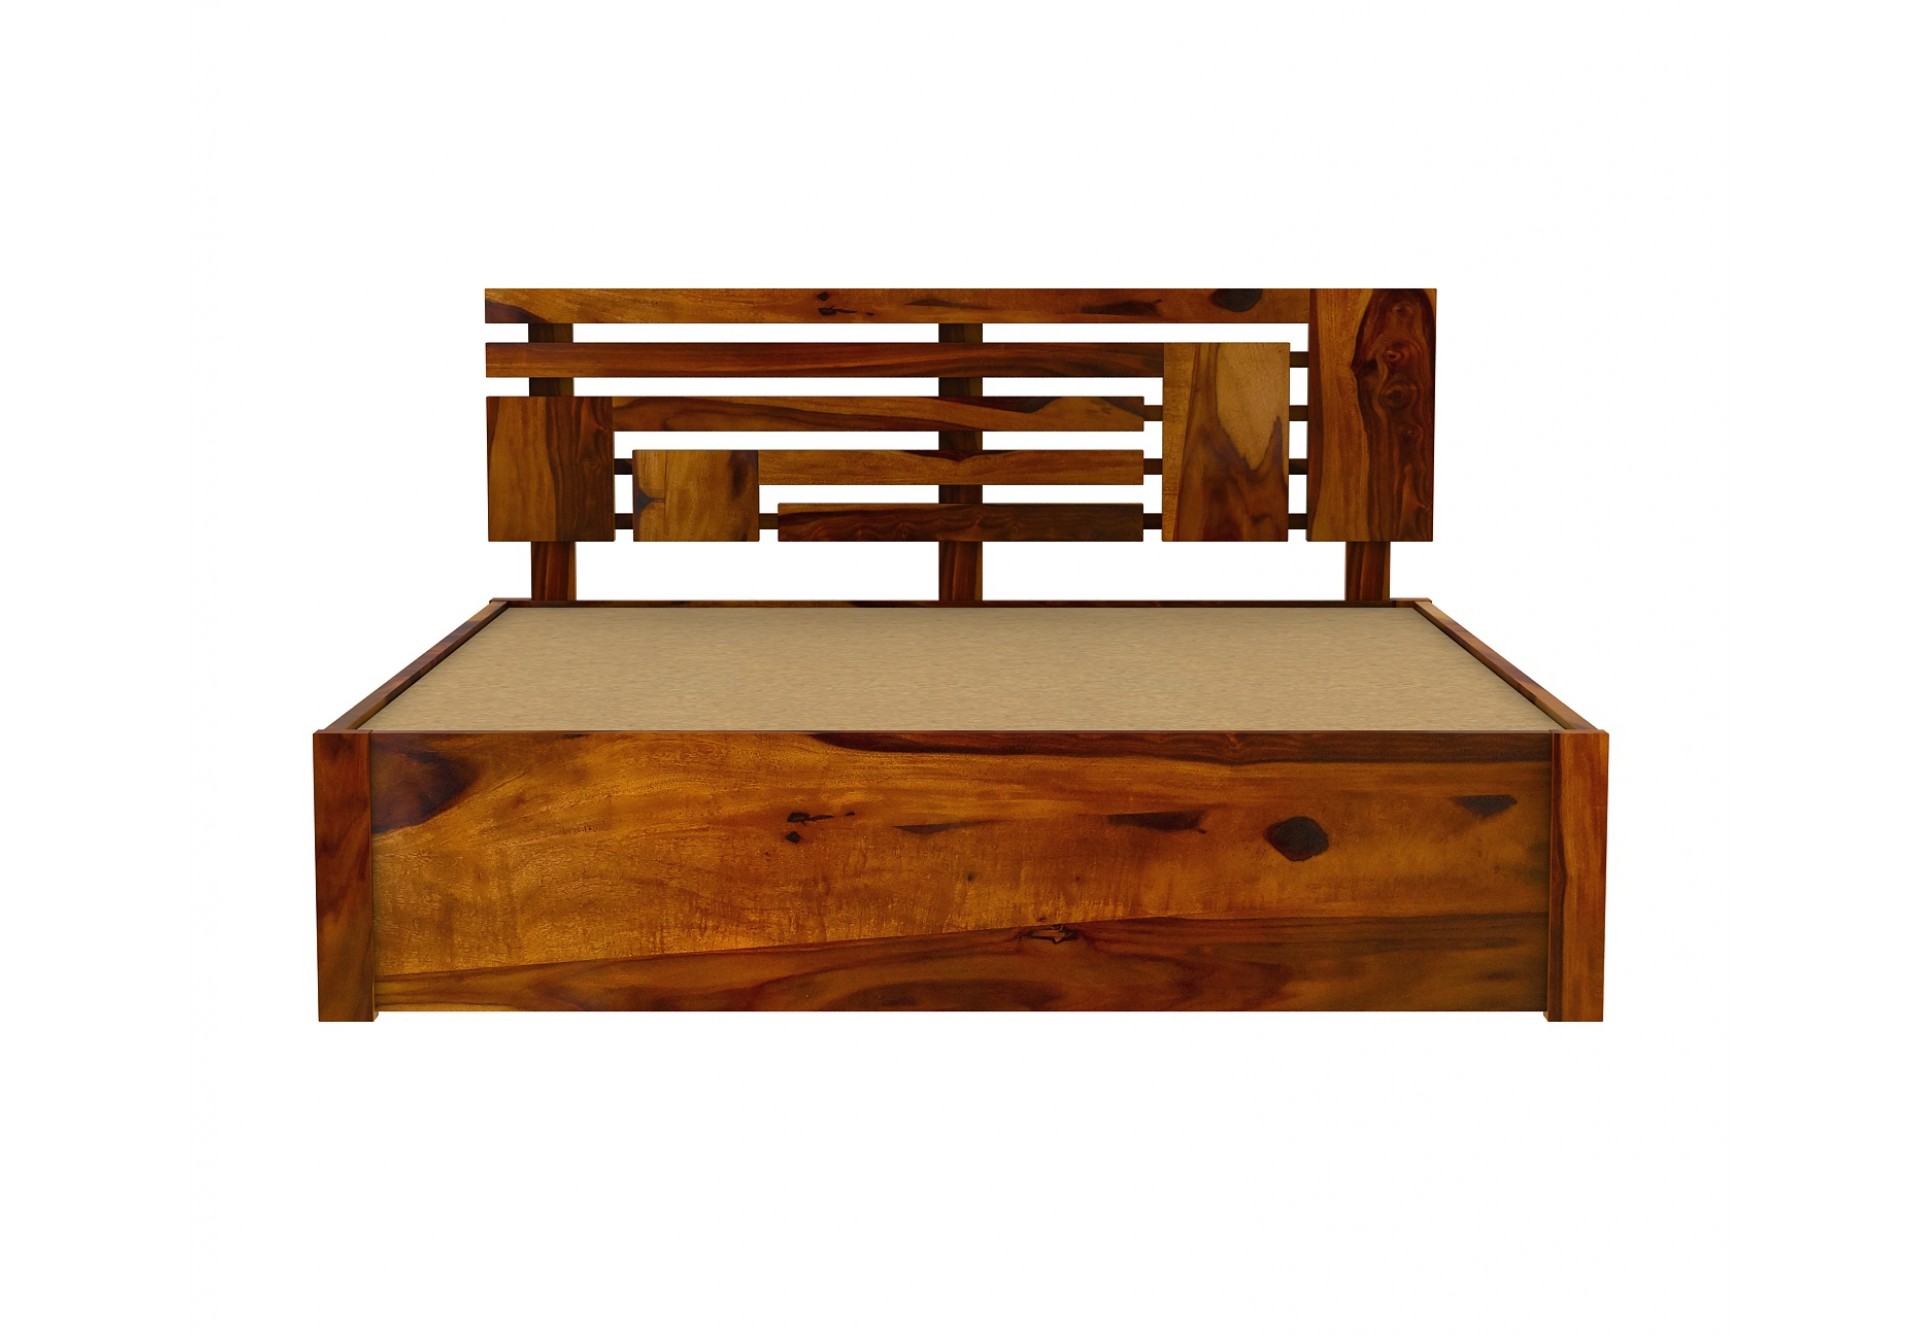 Berlin Wooden Hydraulic Bed  (Queen Size, Honey Finish)